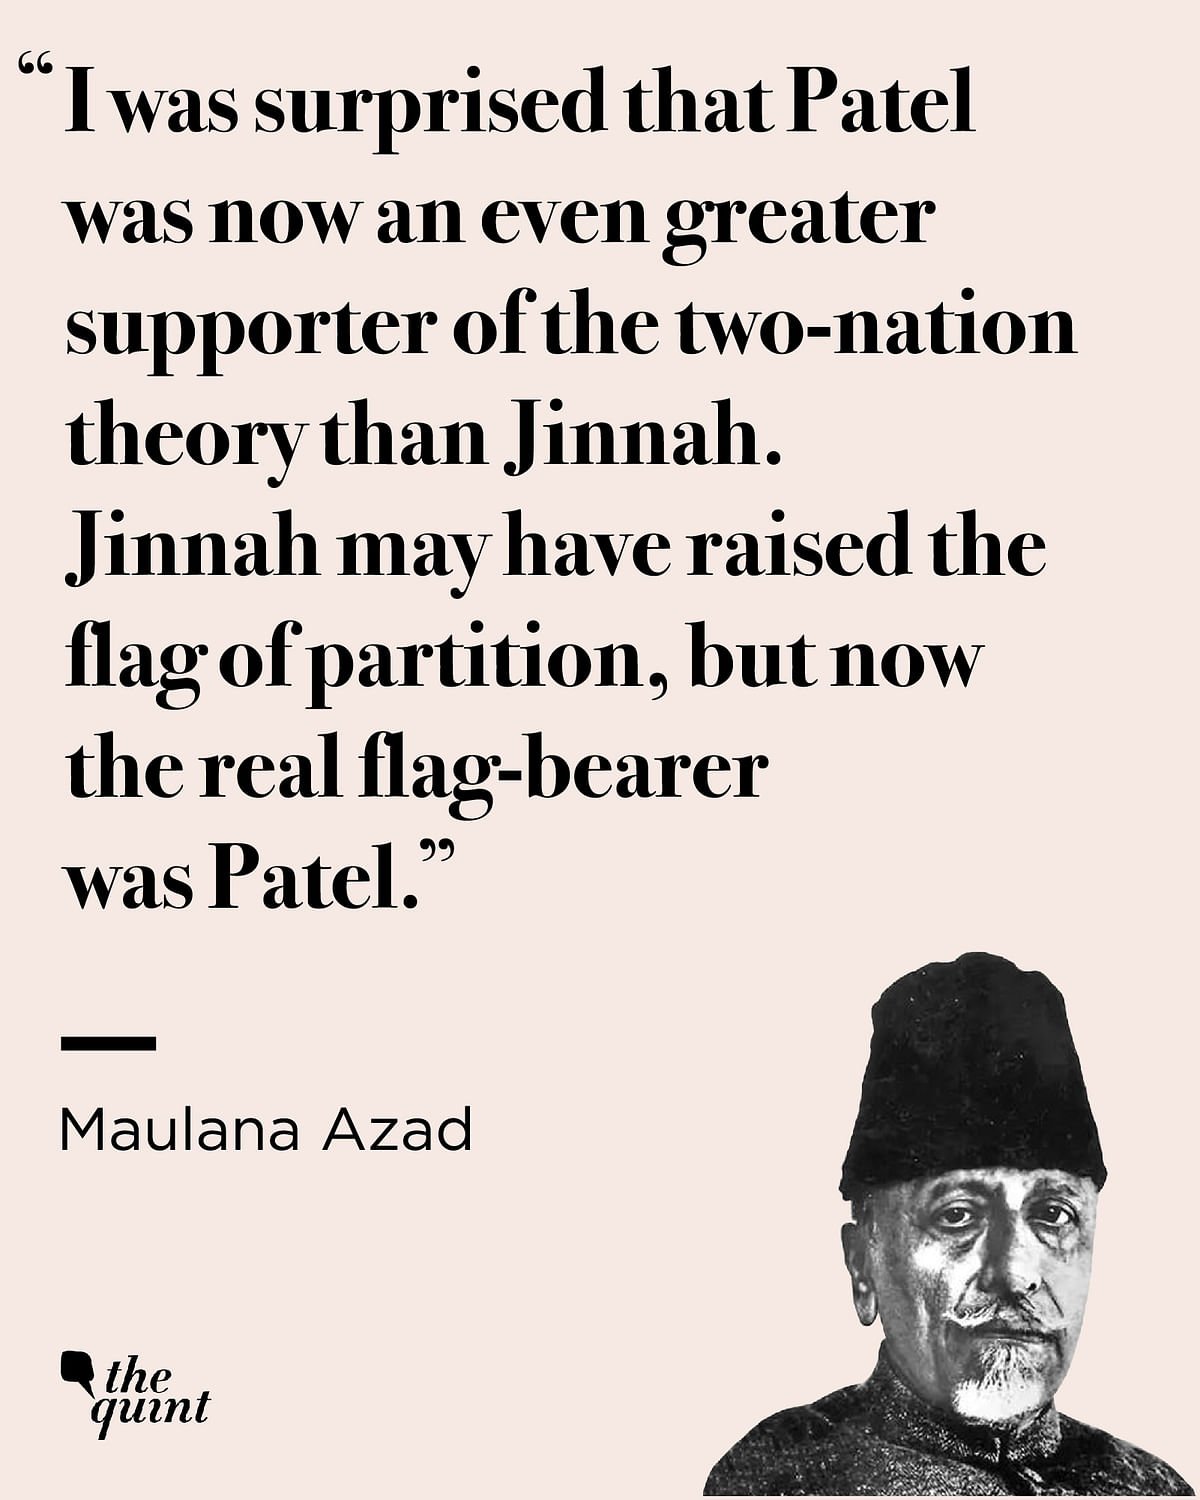 It’s such a pity that leaders like Maulana Abul Kalam Azad have faded from India’s political conscience. 